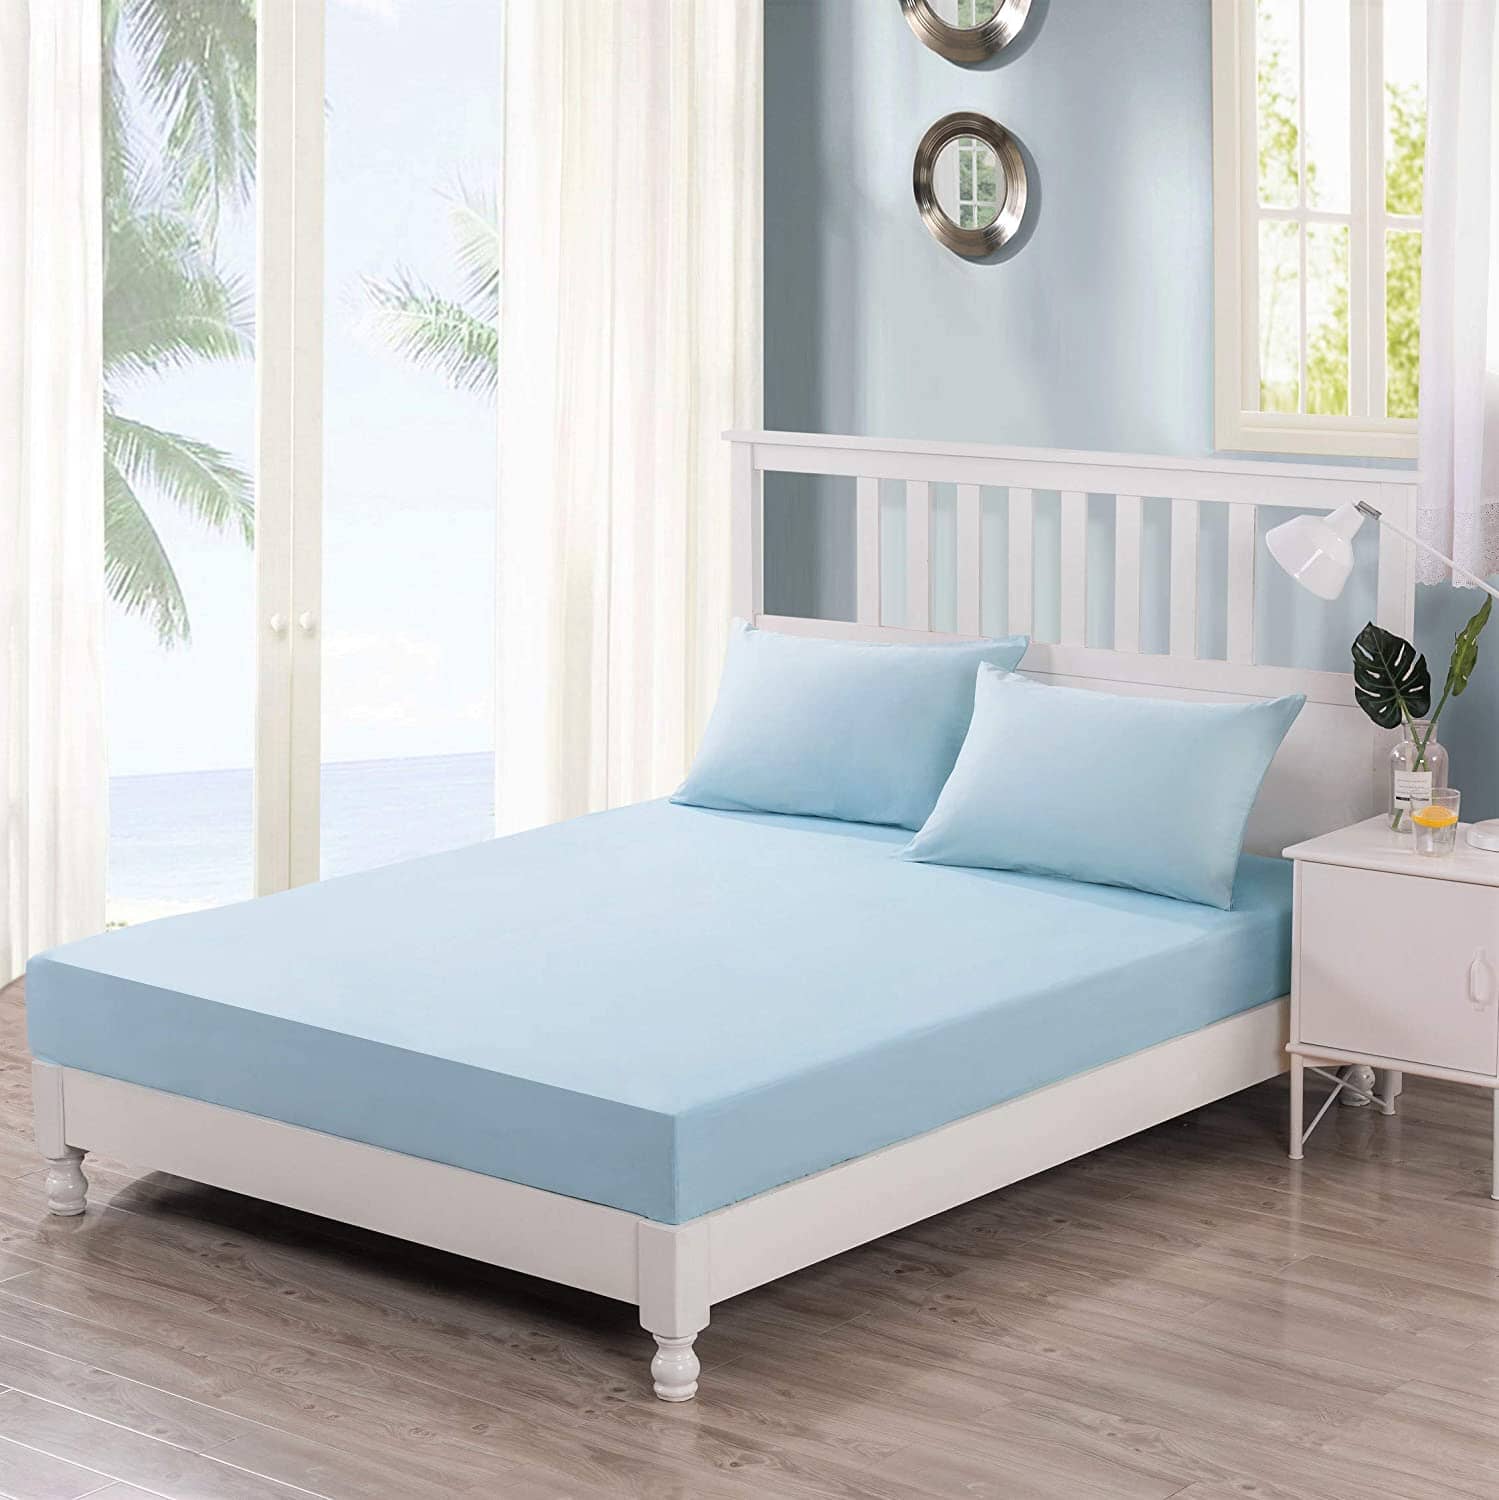 DaDa Bedding Cotton Soothing Light Sky Blue Fitted Sheet (JHW-604) - Tache Home Fashion